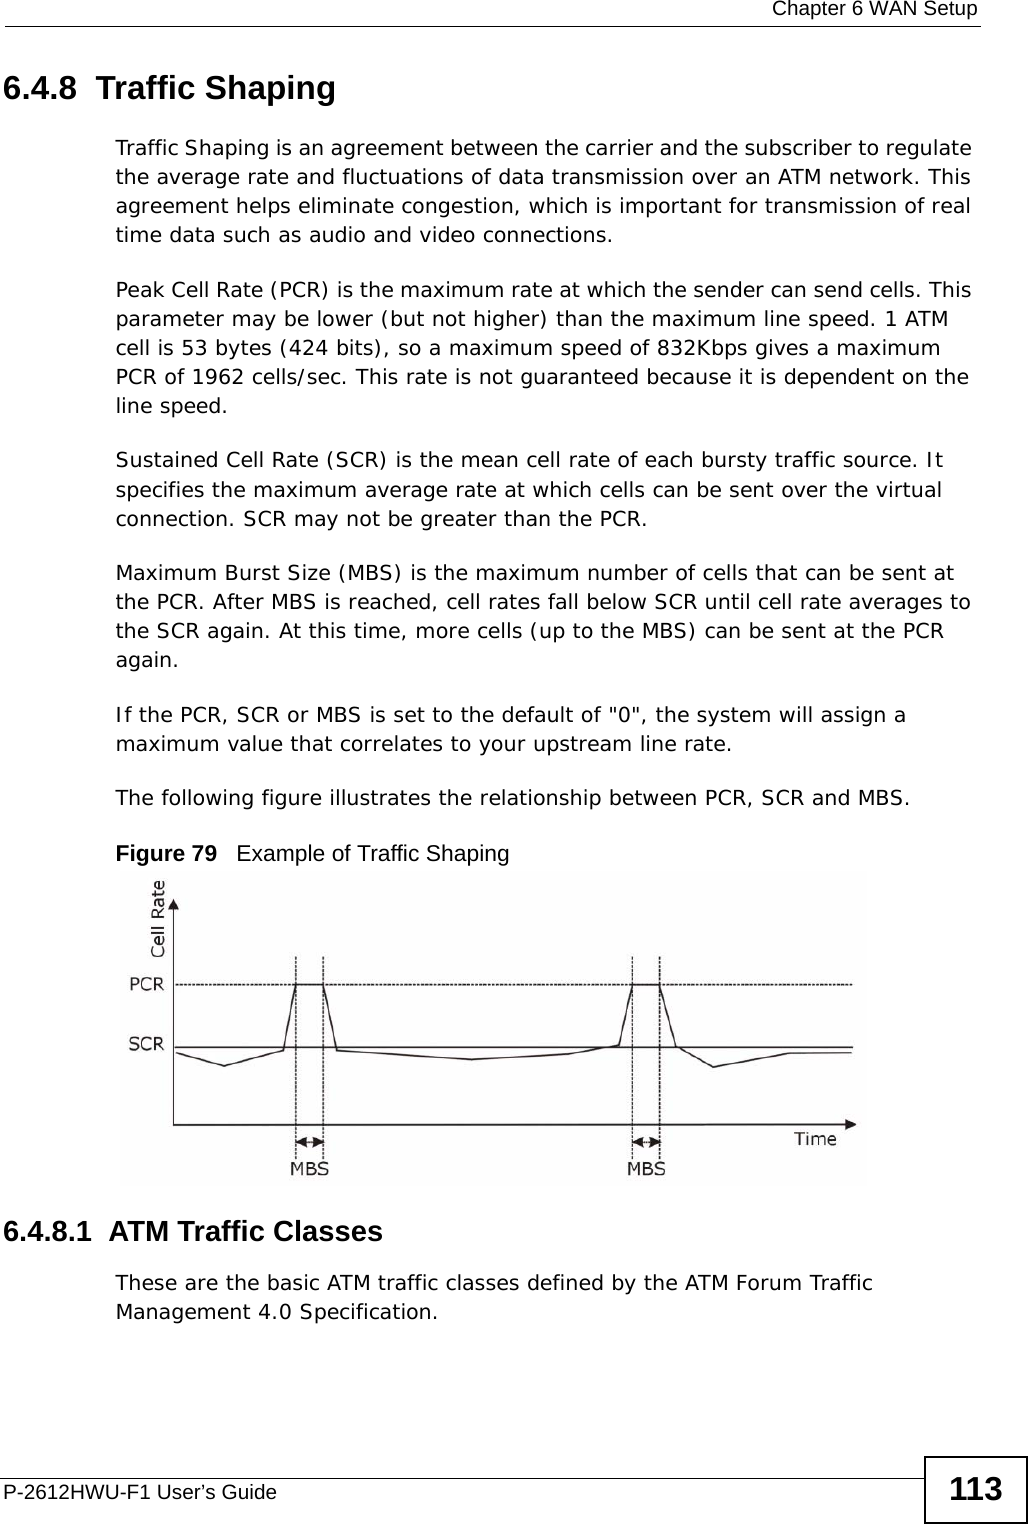  Chapter 6 WAN SetupP-2612HWU-F1 User’s Guide 1136.4.8  Traffic ShapingTraffic Shaping is an agreement between the carrier and the subscriber to regulate the average rate and fluctuations of data transmission over an ATM network. This agreement helps eliminate congestion, which is important for transmission of real time data such as audio and video connections.Peak Cell Rate (PCR) is the maximum rate at which the sender can send cells. This parameter may be lower (but not higher) than the maximum line speed. 1 ATM cell is 53 bytes (424 bits), so a maximum speed of 832Kbps gives a maximum PCR of 1962 cells/sec. This rate is not guaranteed because it is dependent on the line speed.Sustained Cell Rate (SCR) is the mean cell rate of each bursty traffic source. It specifies the maximum average rate at which cells can be sent over the virtual connection. SCR may not be greater than the PCR.Maximum Burst Size (MBS) is the maximum number of cells that can be sent at the PCR. After MBS is reached, cell rates fall below SCR until cell rate averages to the SCR again. At this time, more cells (up to the MBS) can be sent at the PCR again.If the PCR, SCR or MBS is set to the default of &quot;0&quot;, the system will assign a maximum value that correlates to your upstream line rate. The following figure illustrates the relationship between PCR, SCR and MBS. Figure 79   Example of Traffic Shaping6.4.8.1  ATM Traffic ClassesThese are the basic ATM traffic classes defined by the ATM Forum Traffic Management 4.0 Specification. 